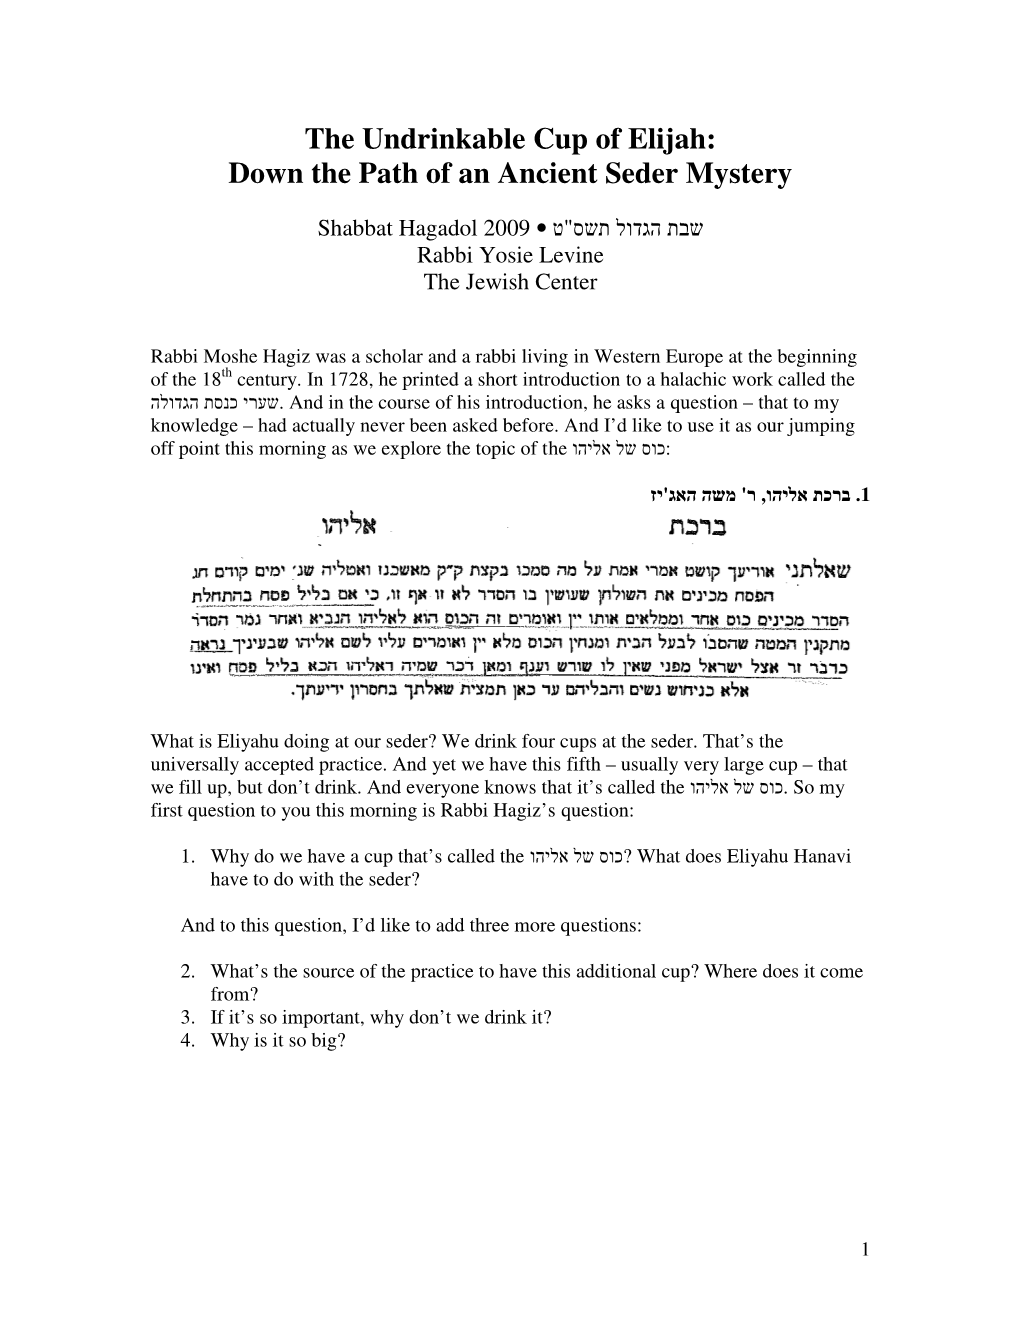 The Undrinkable Cup of Elijah: Down the Path of an Ancient Seder Mystery